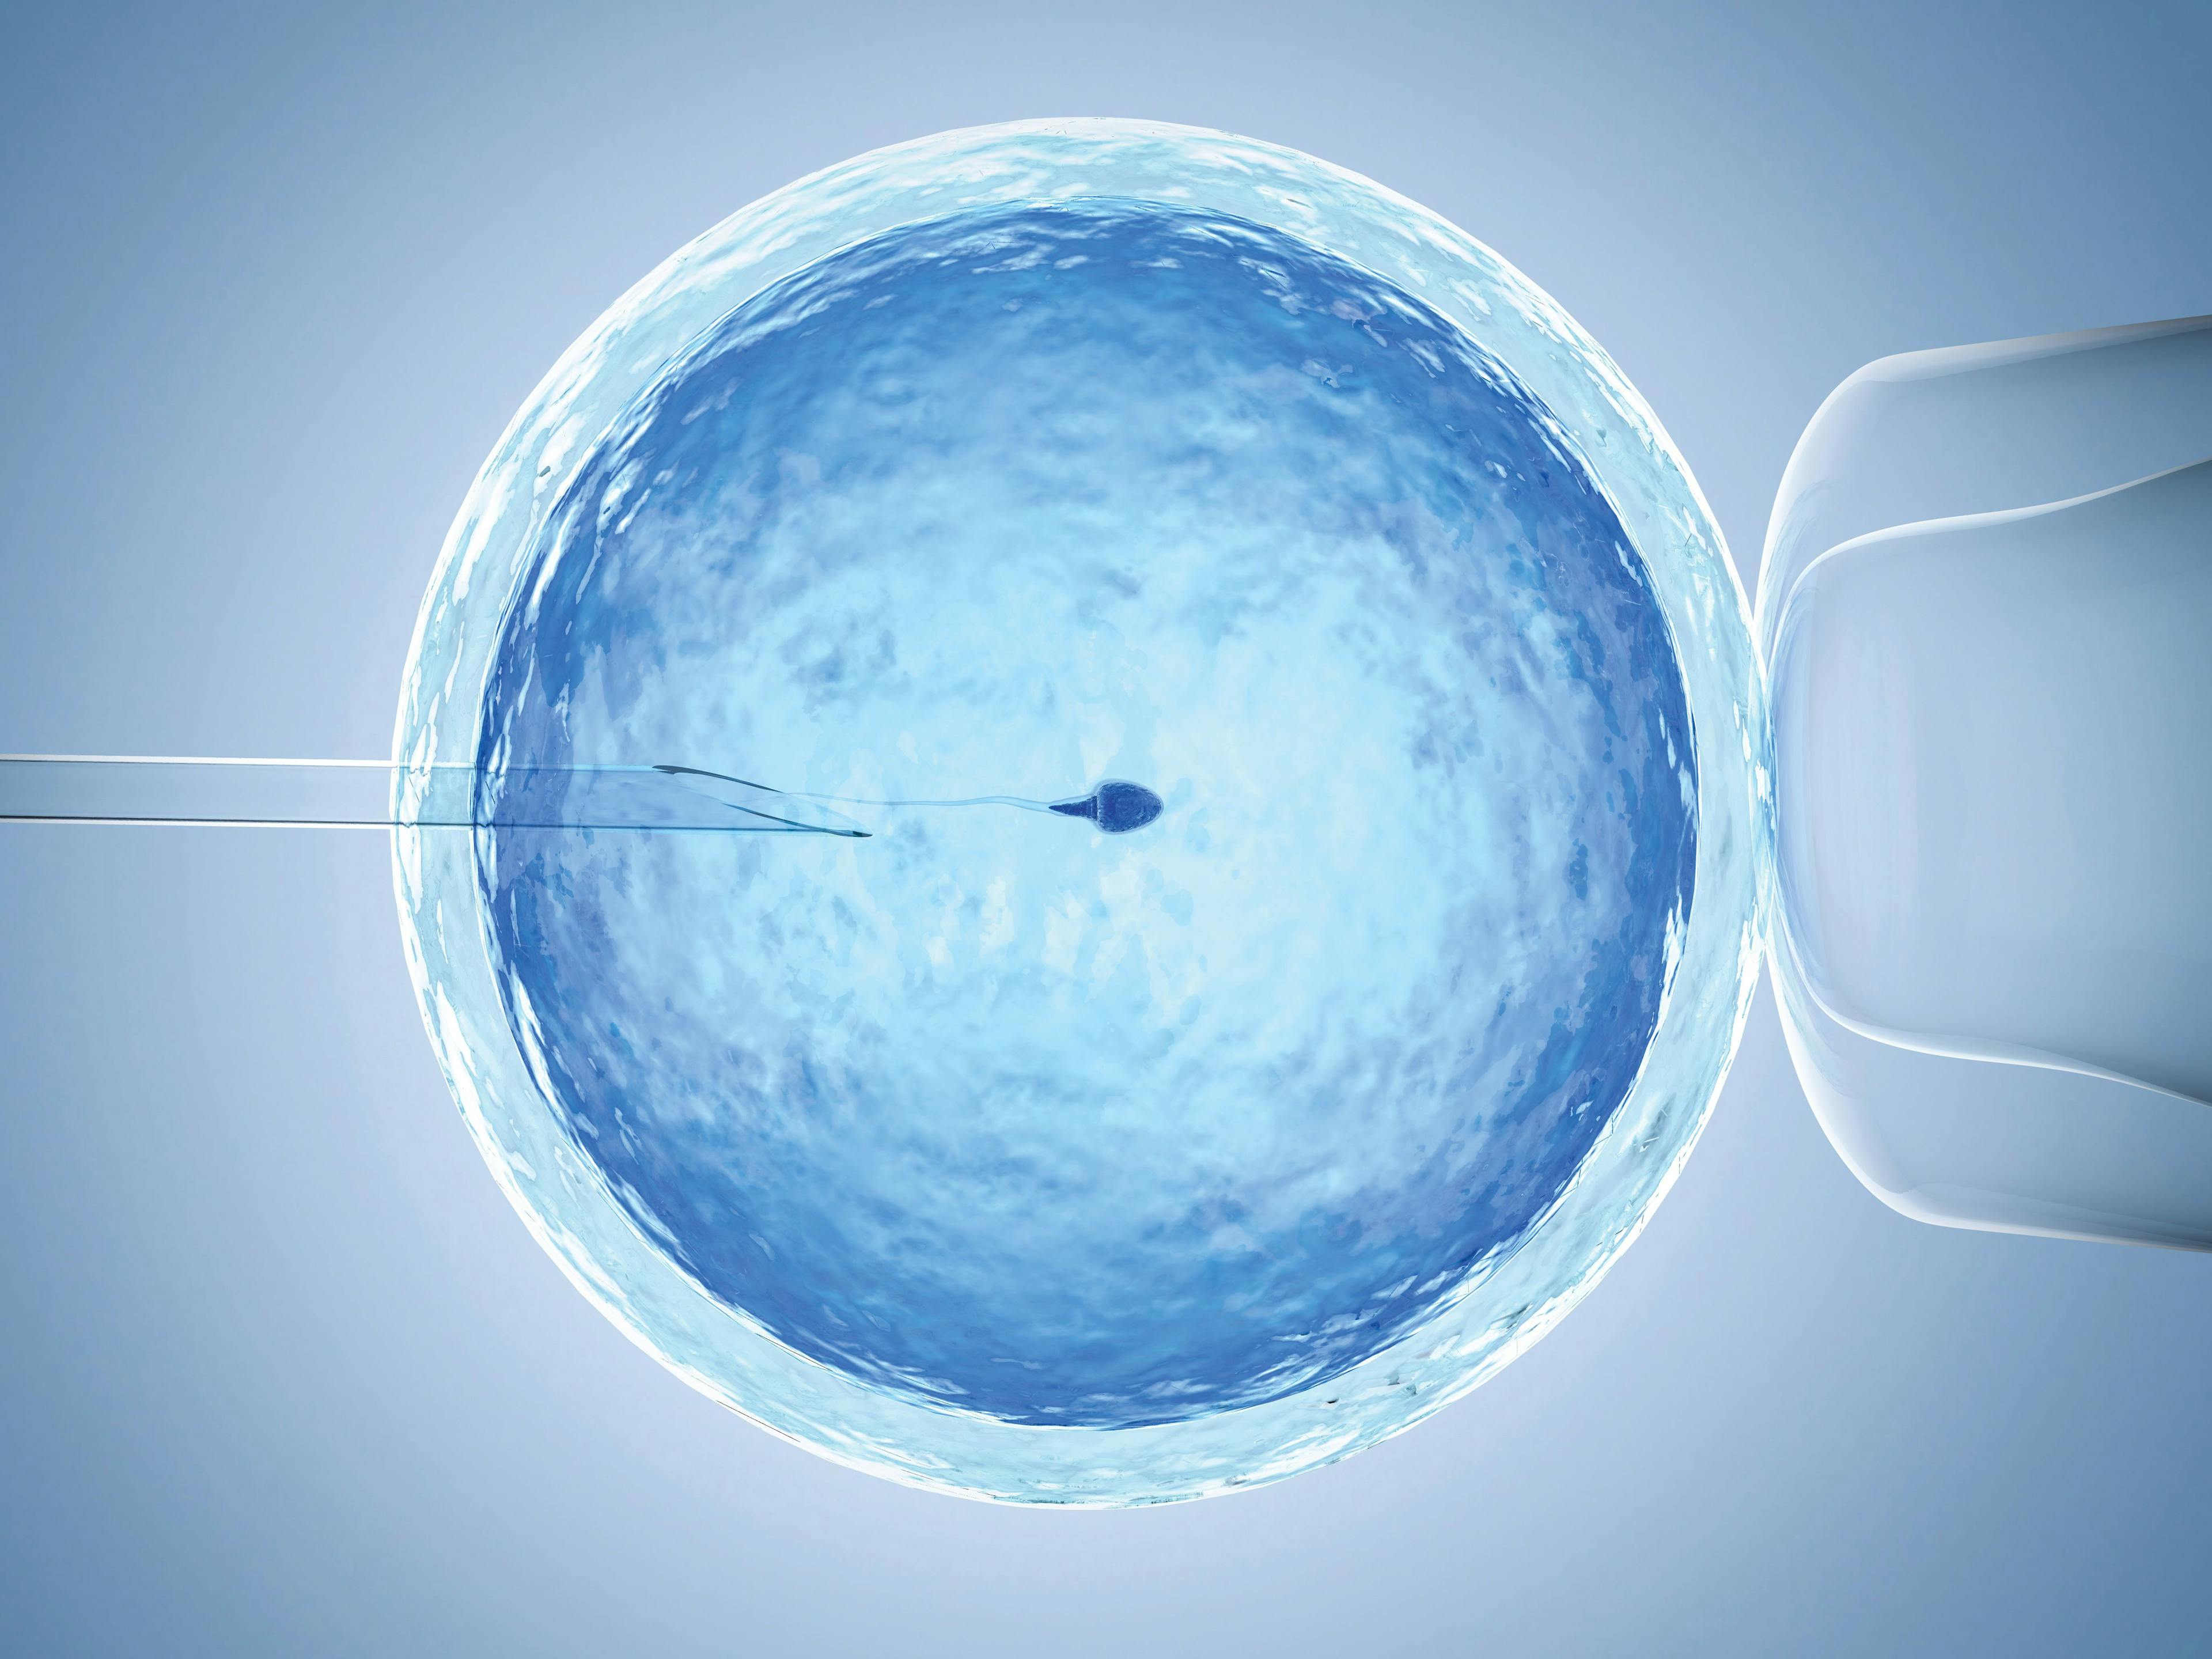 Not just abortion: How the demise of Roe v Wade may impact fertility care